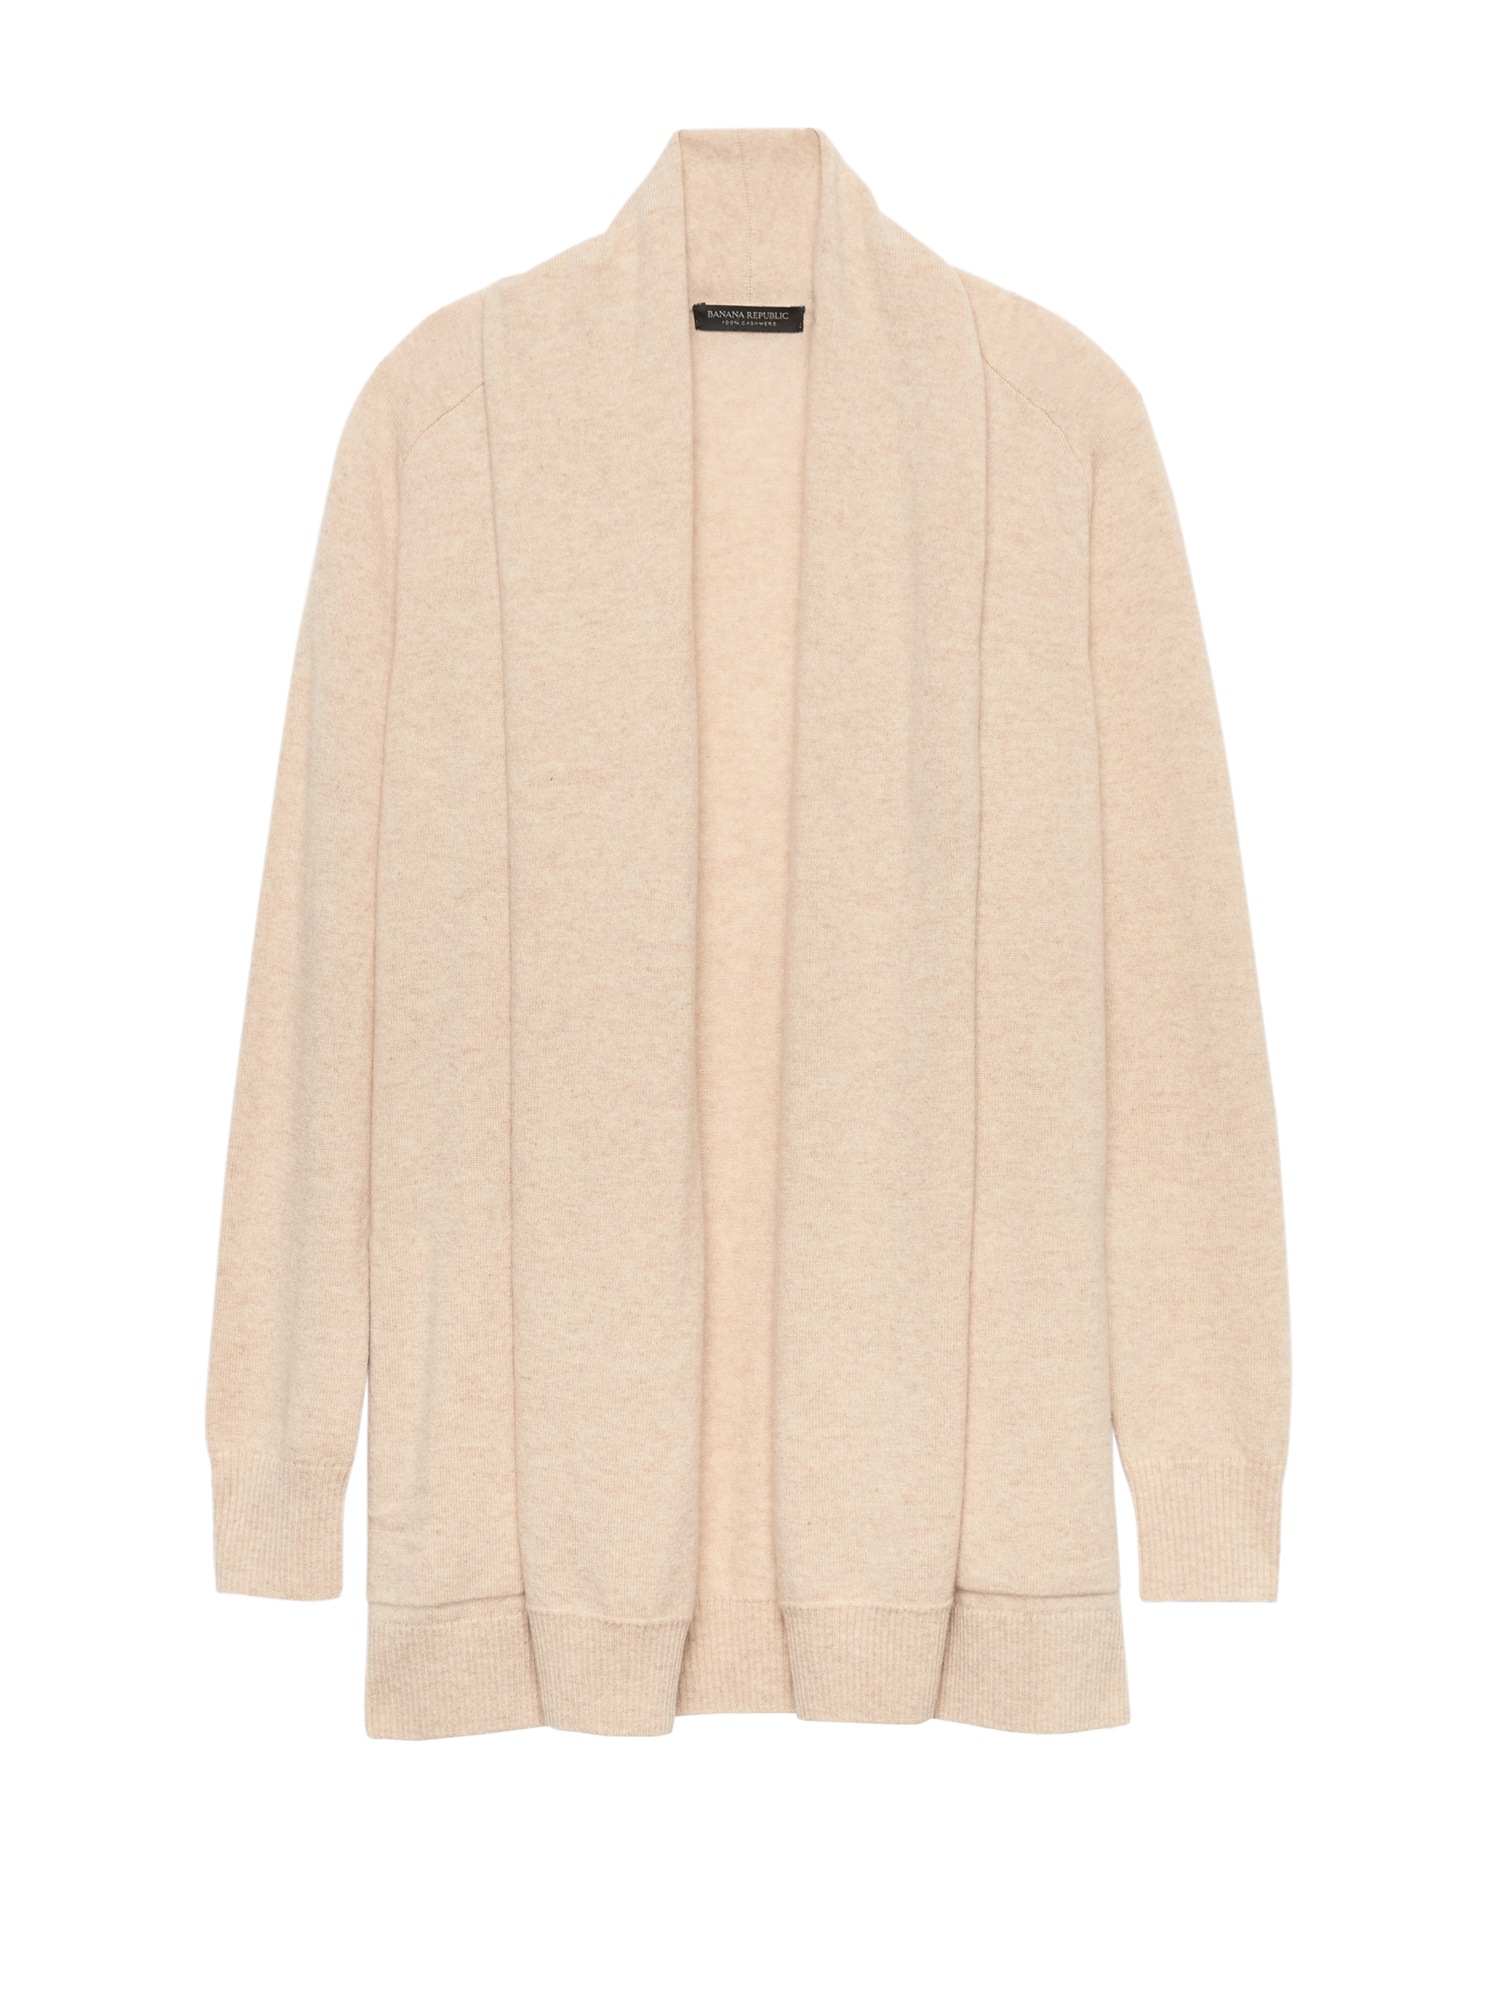 Cashmere Open Long Cardigan Sweater